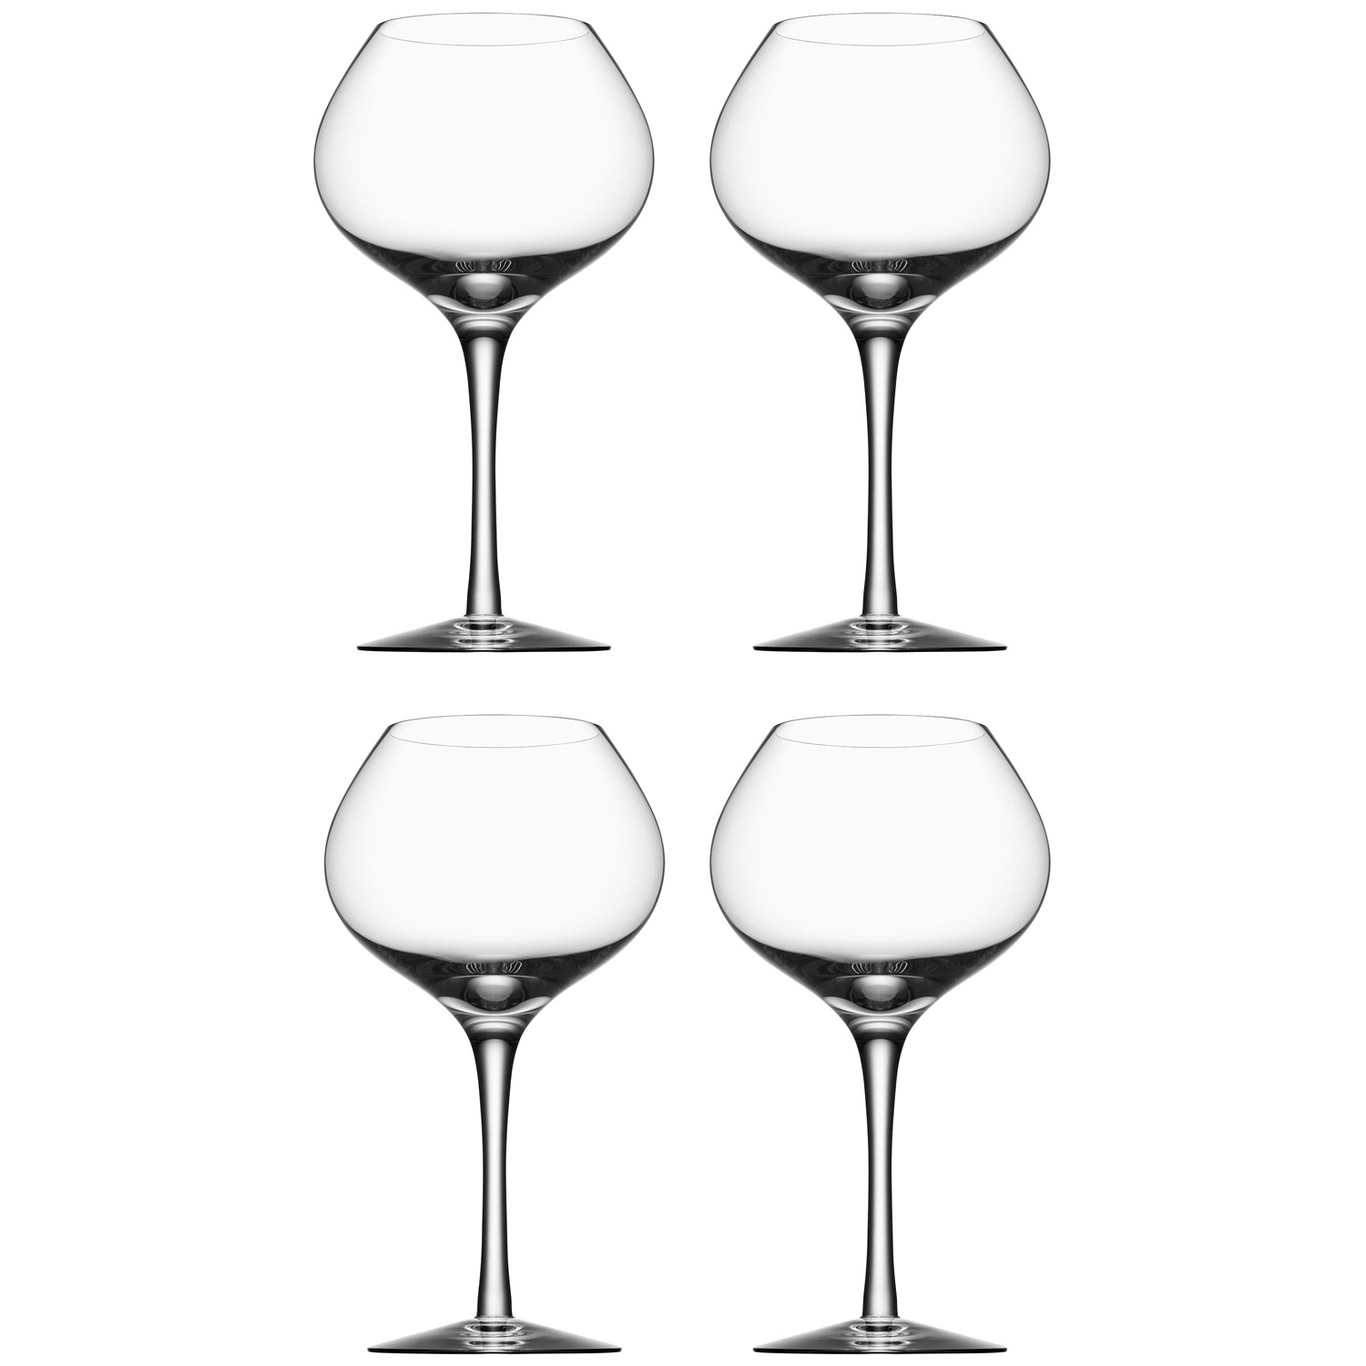 More Mature Red Wine Glass 48 cl, 4 Pcs